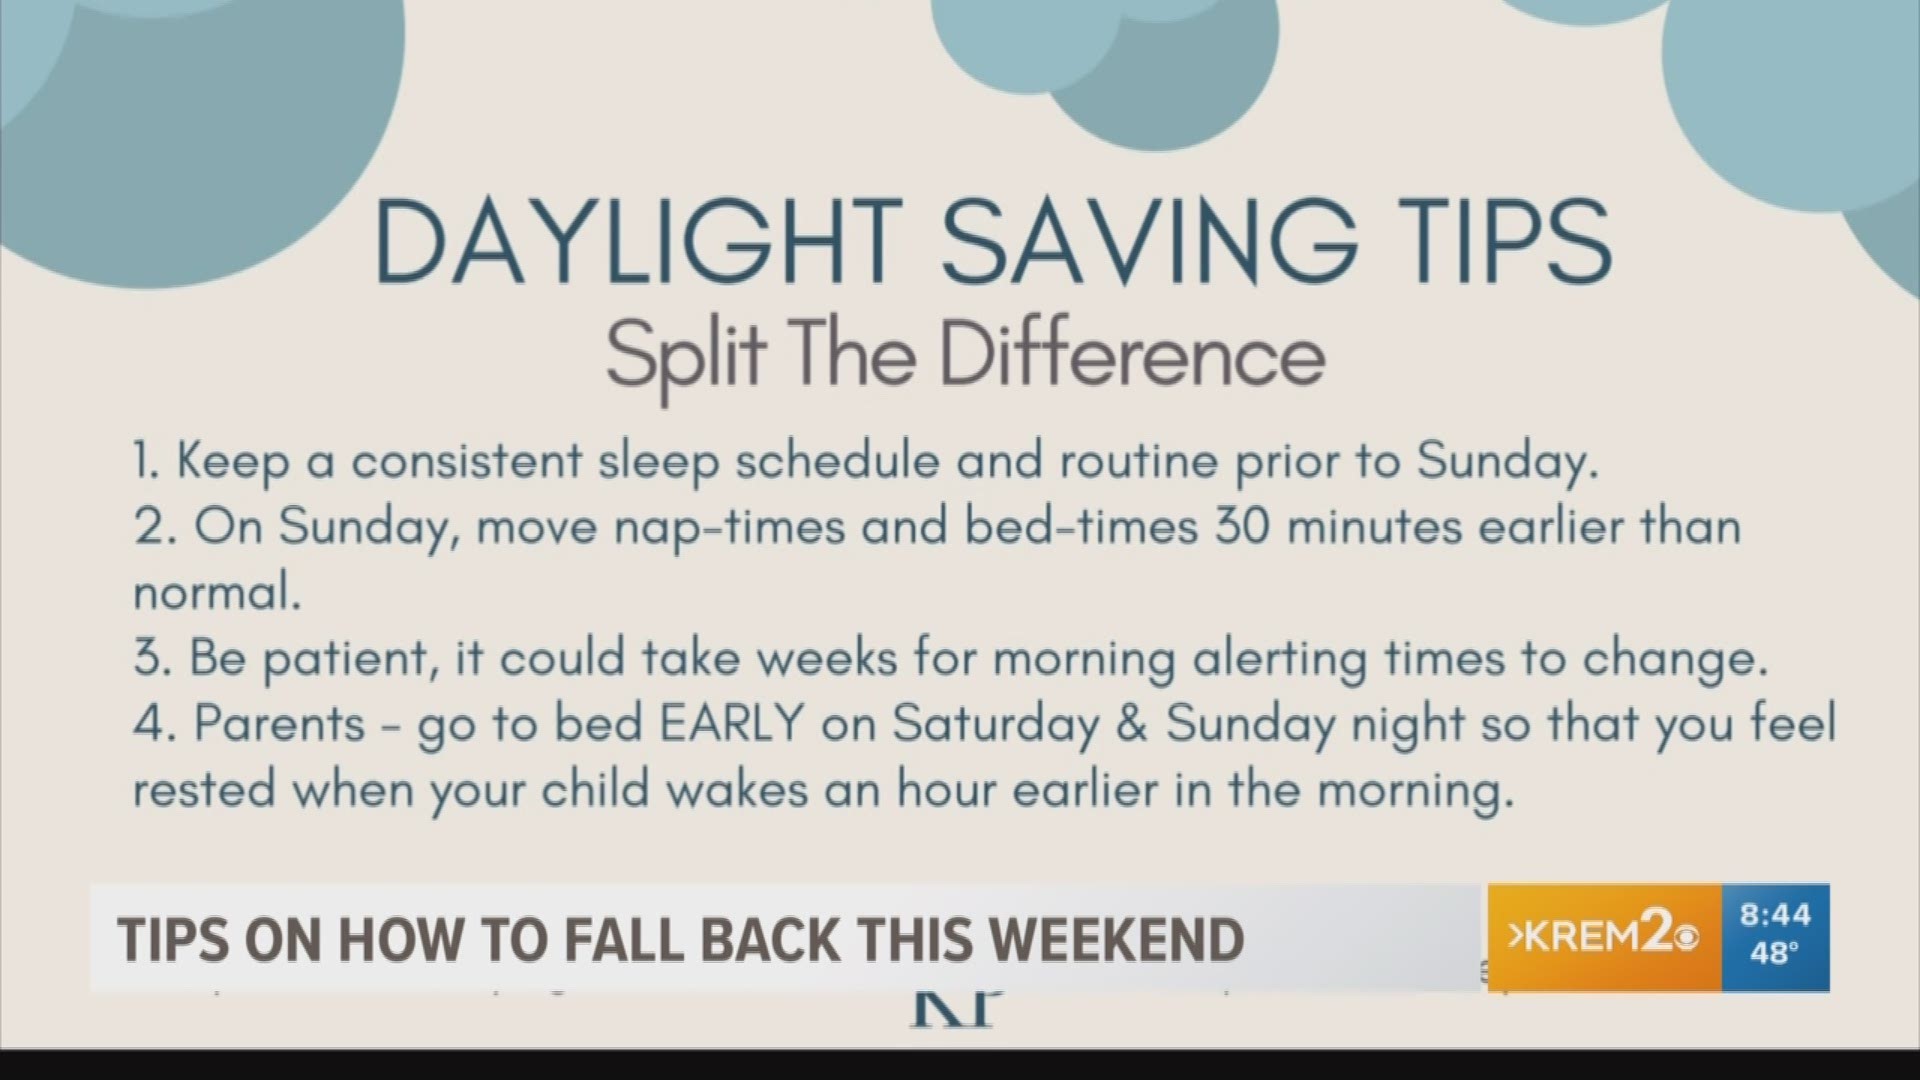 Sleep Expert Kristine Petterson explains how to adjust to Daylight Saving Time. She breaks it down by age so your entire family can ease into the time change.